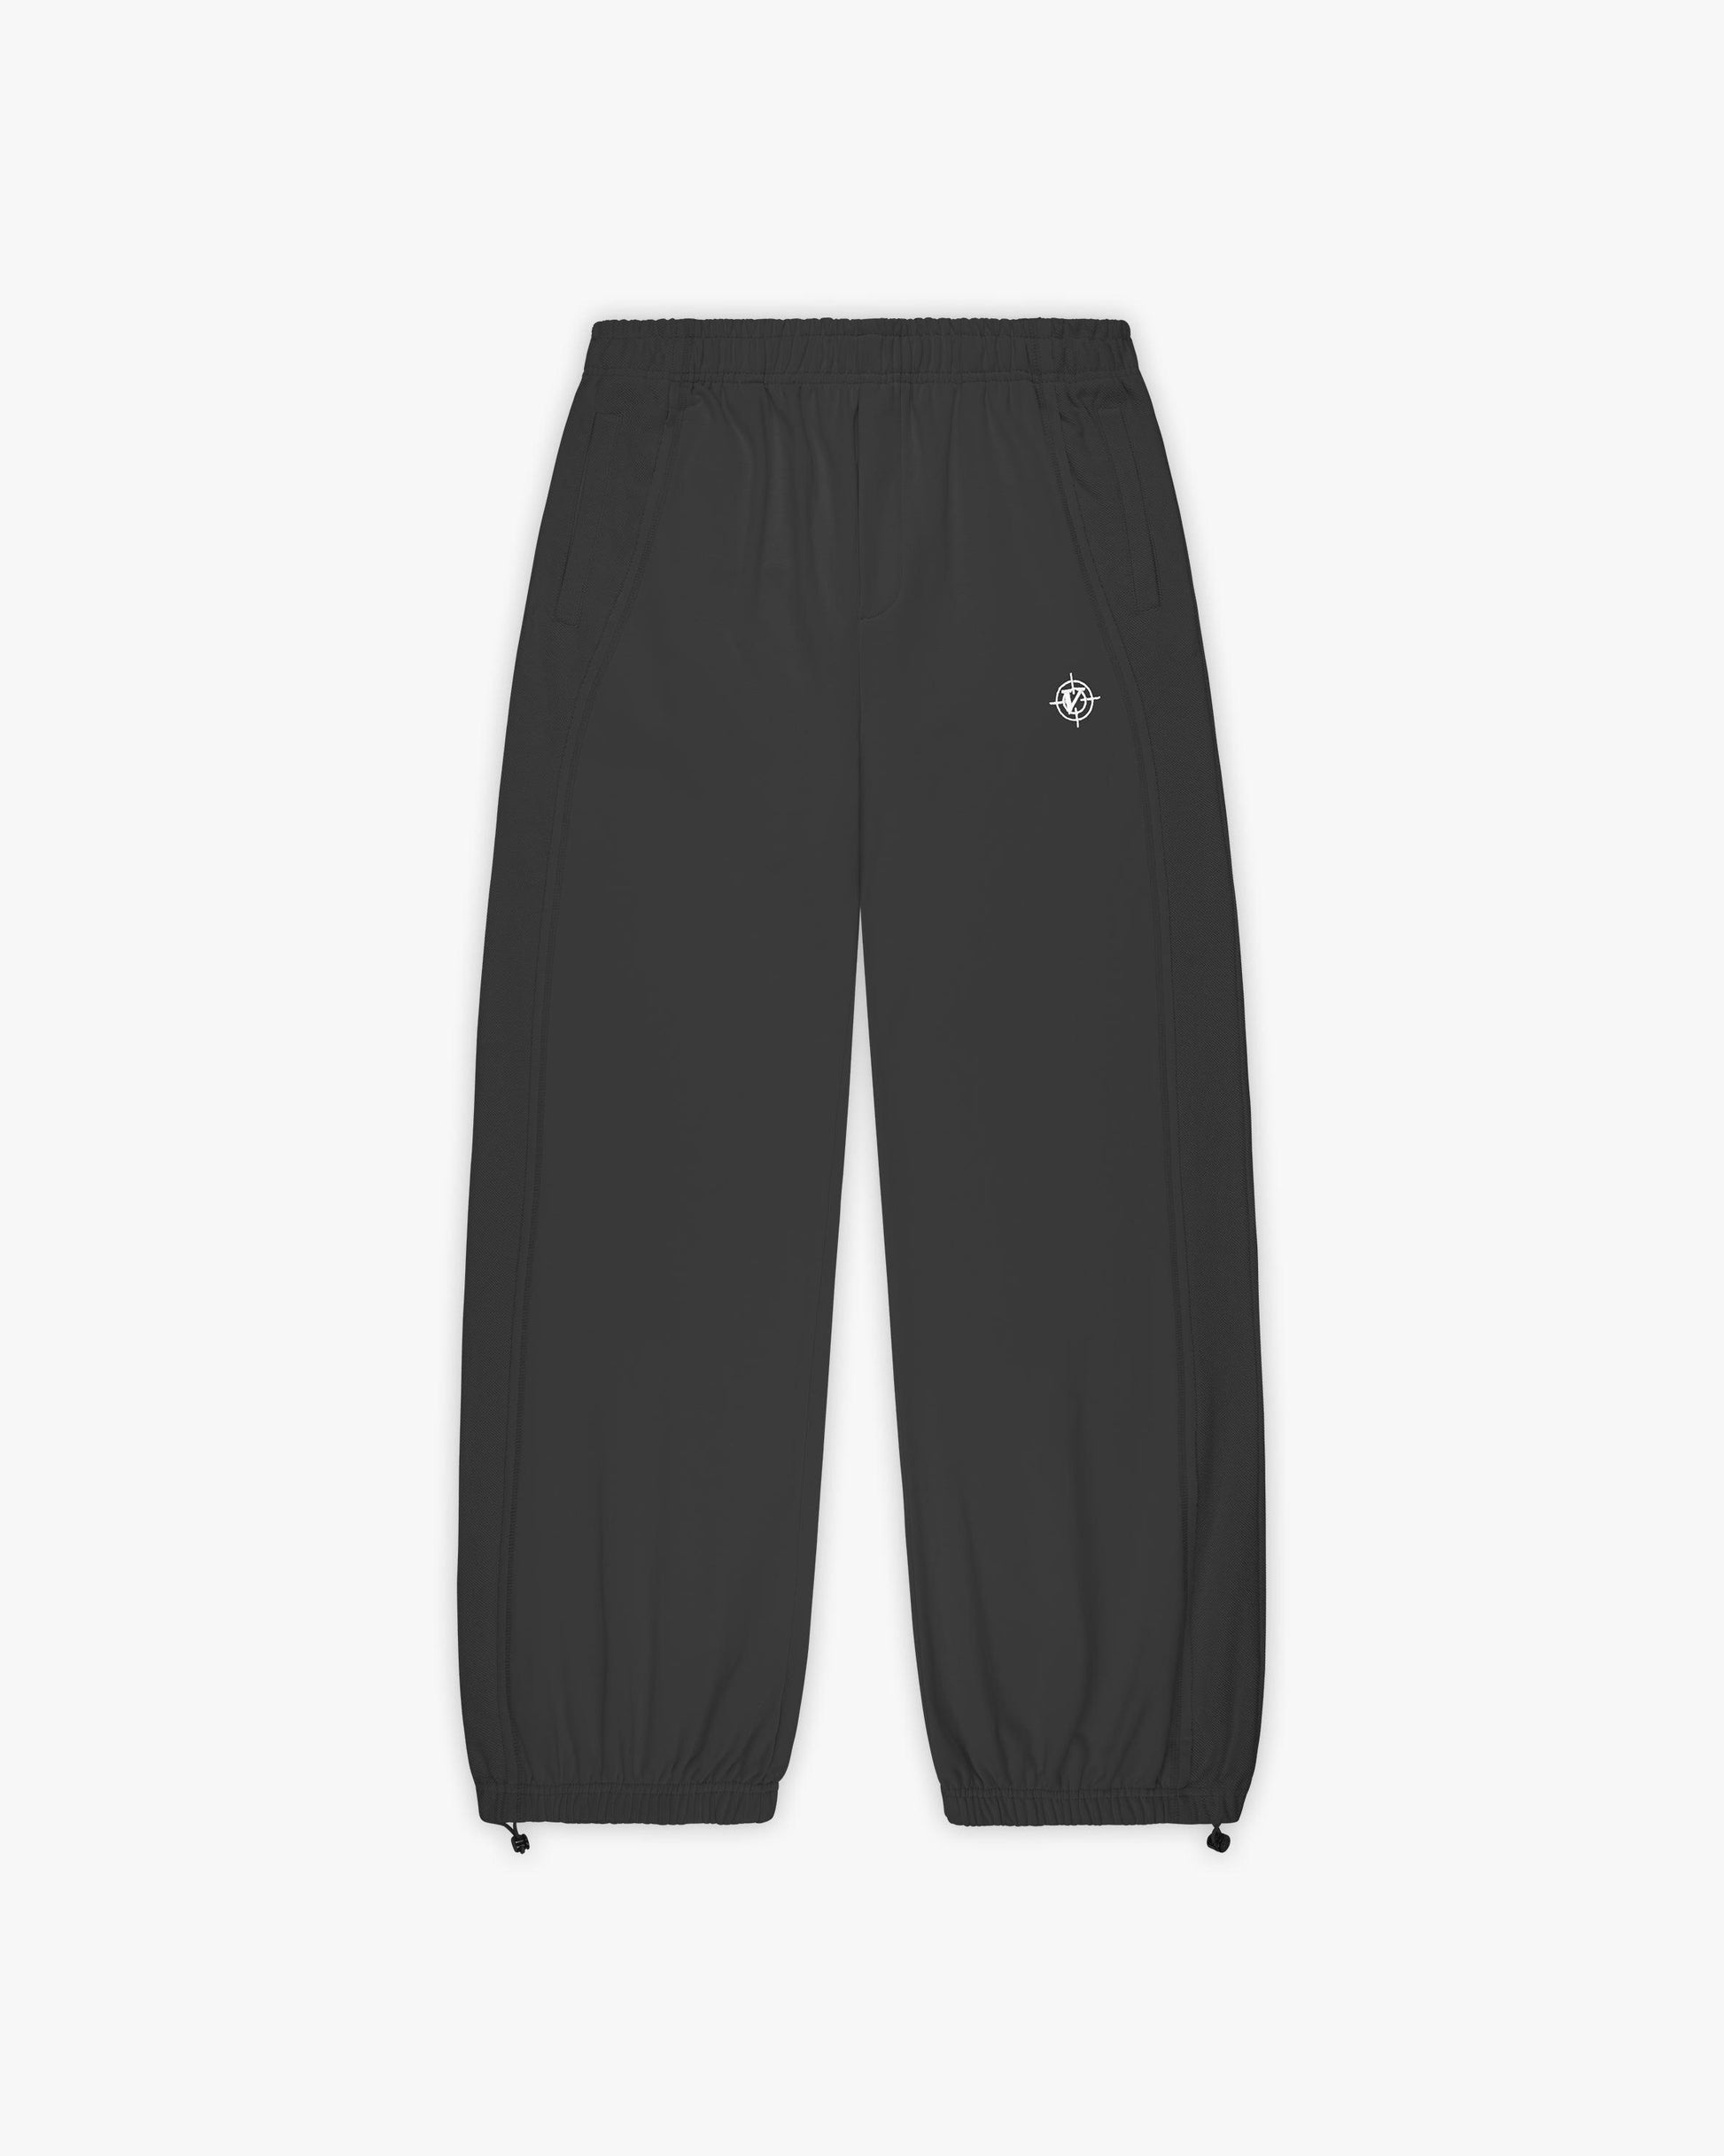 INSIDE OUT JOGGER ASH GREY - VICINITY